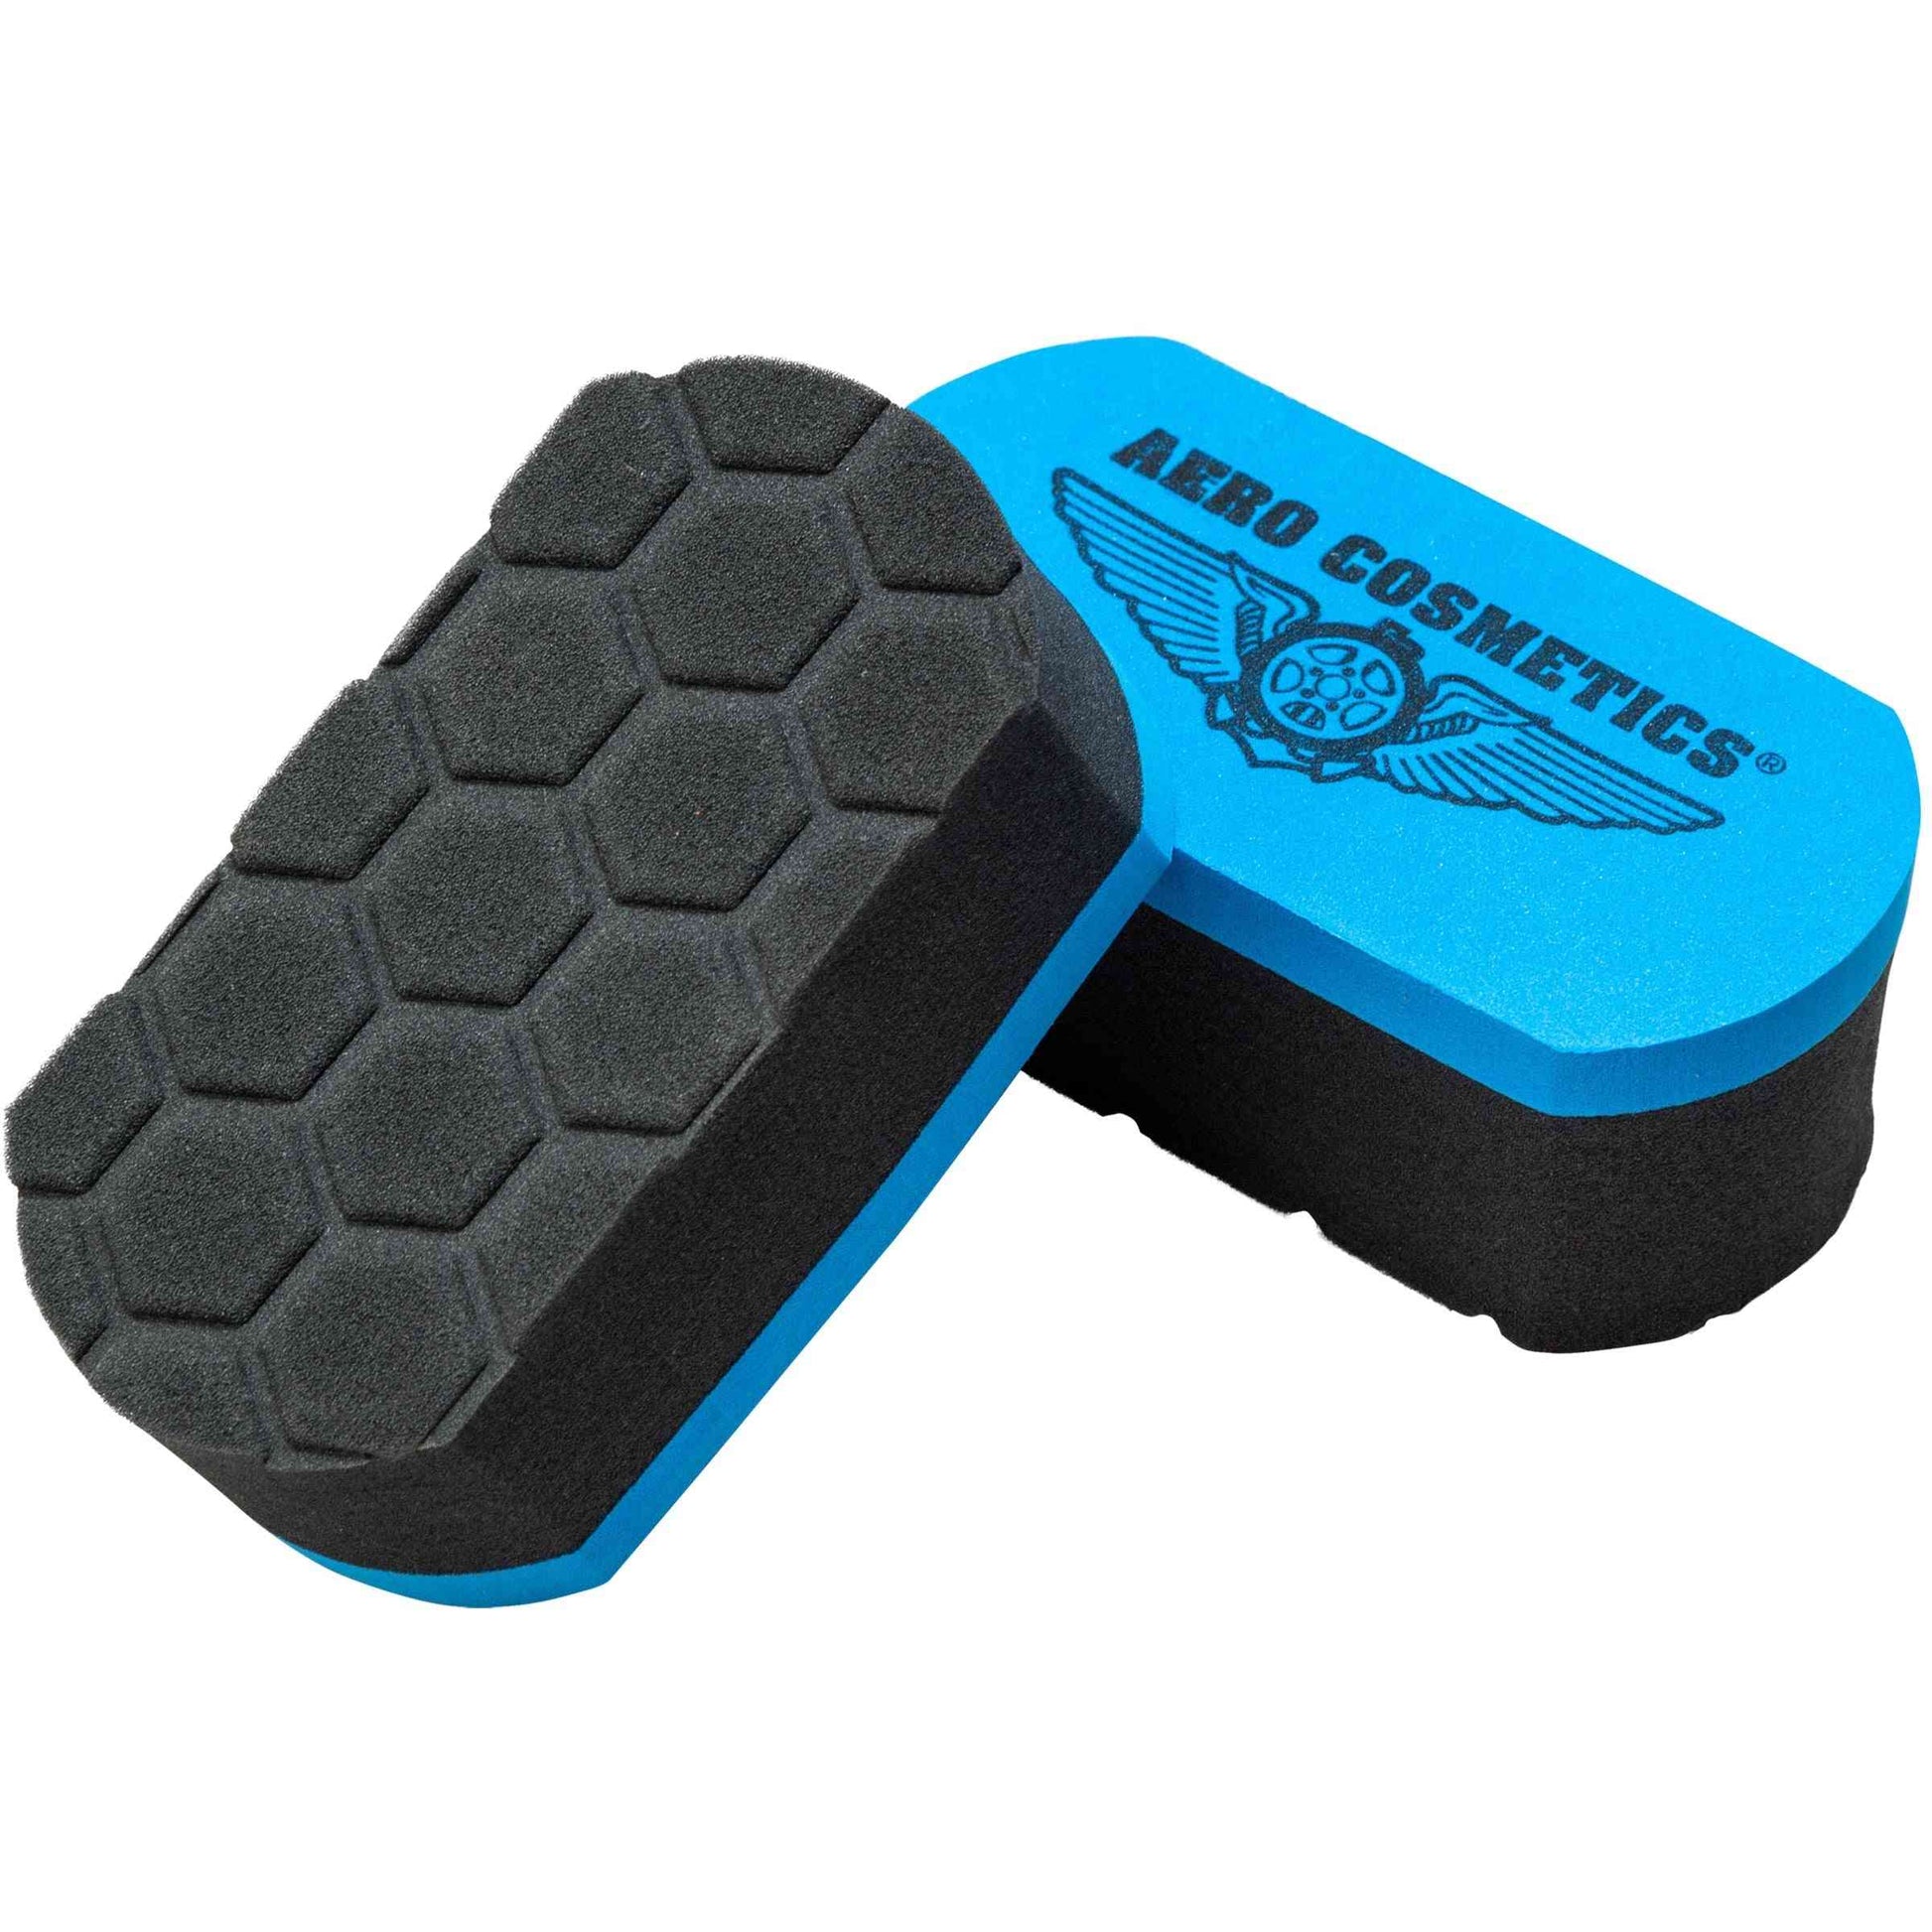 Rubber Care Applicator - Tire Dressing Applicator – Wash Wax ALL